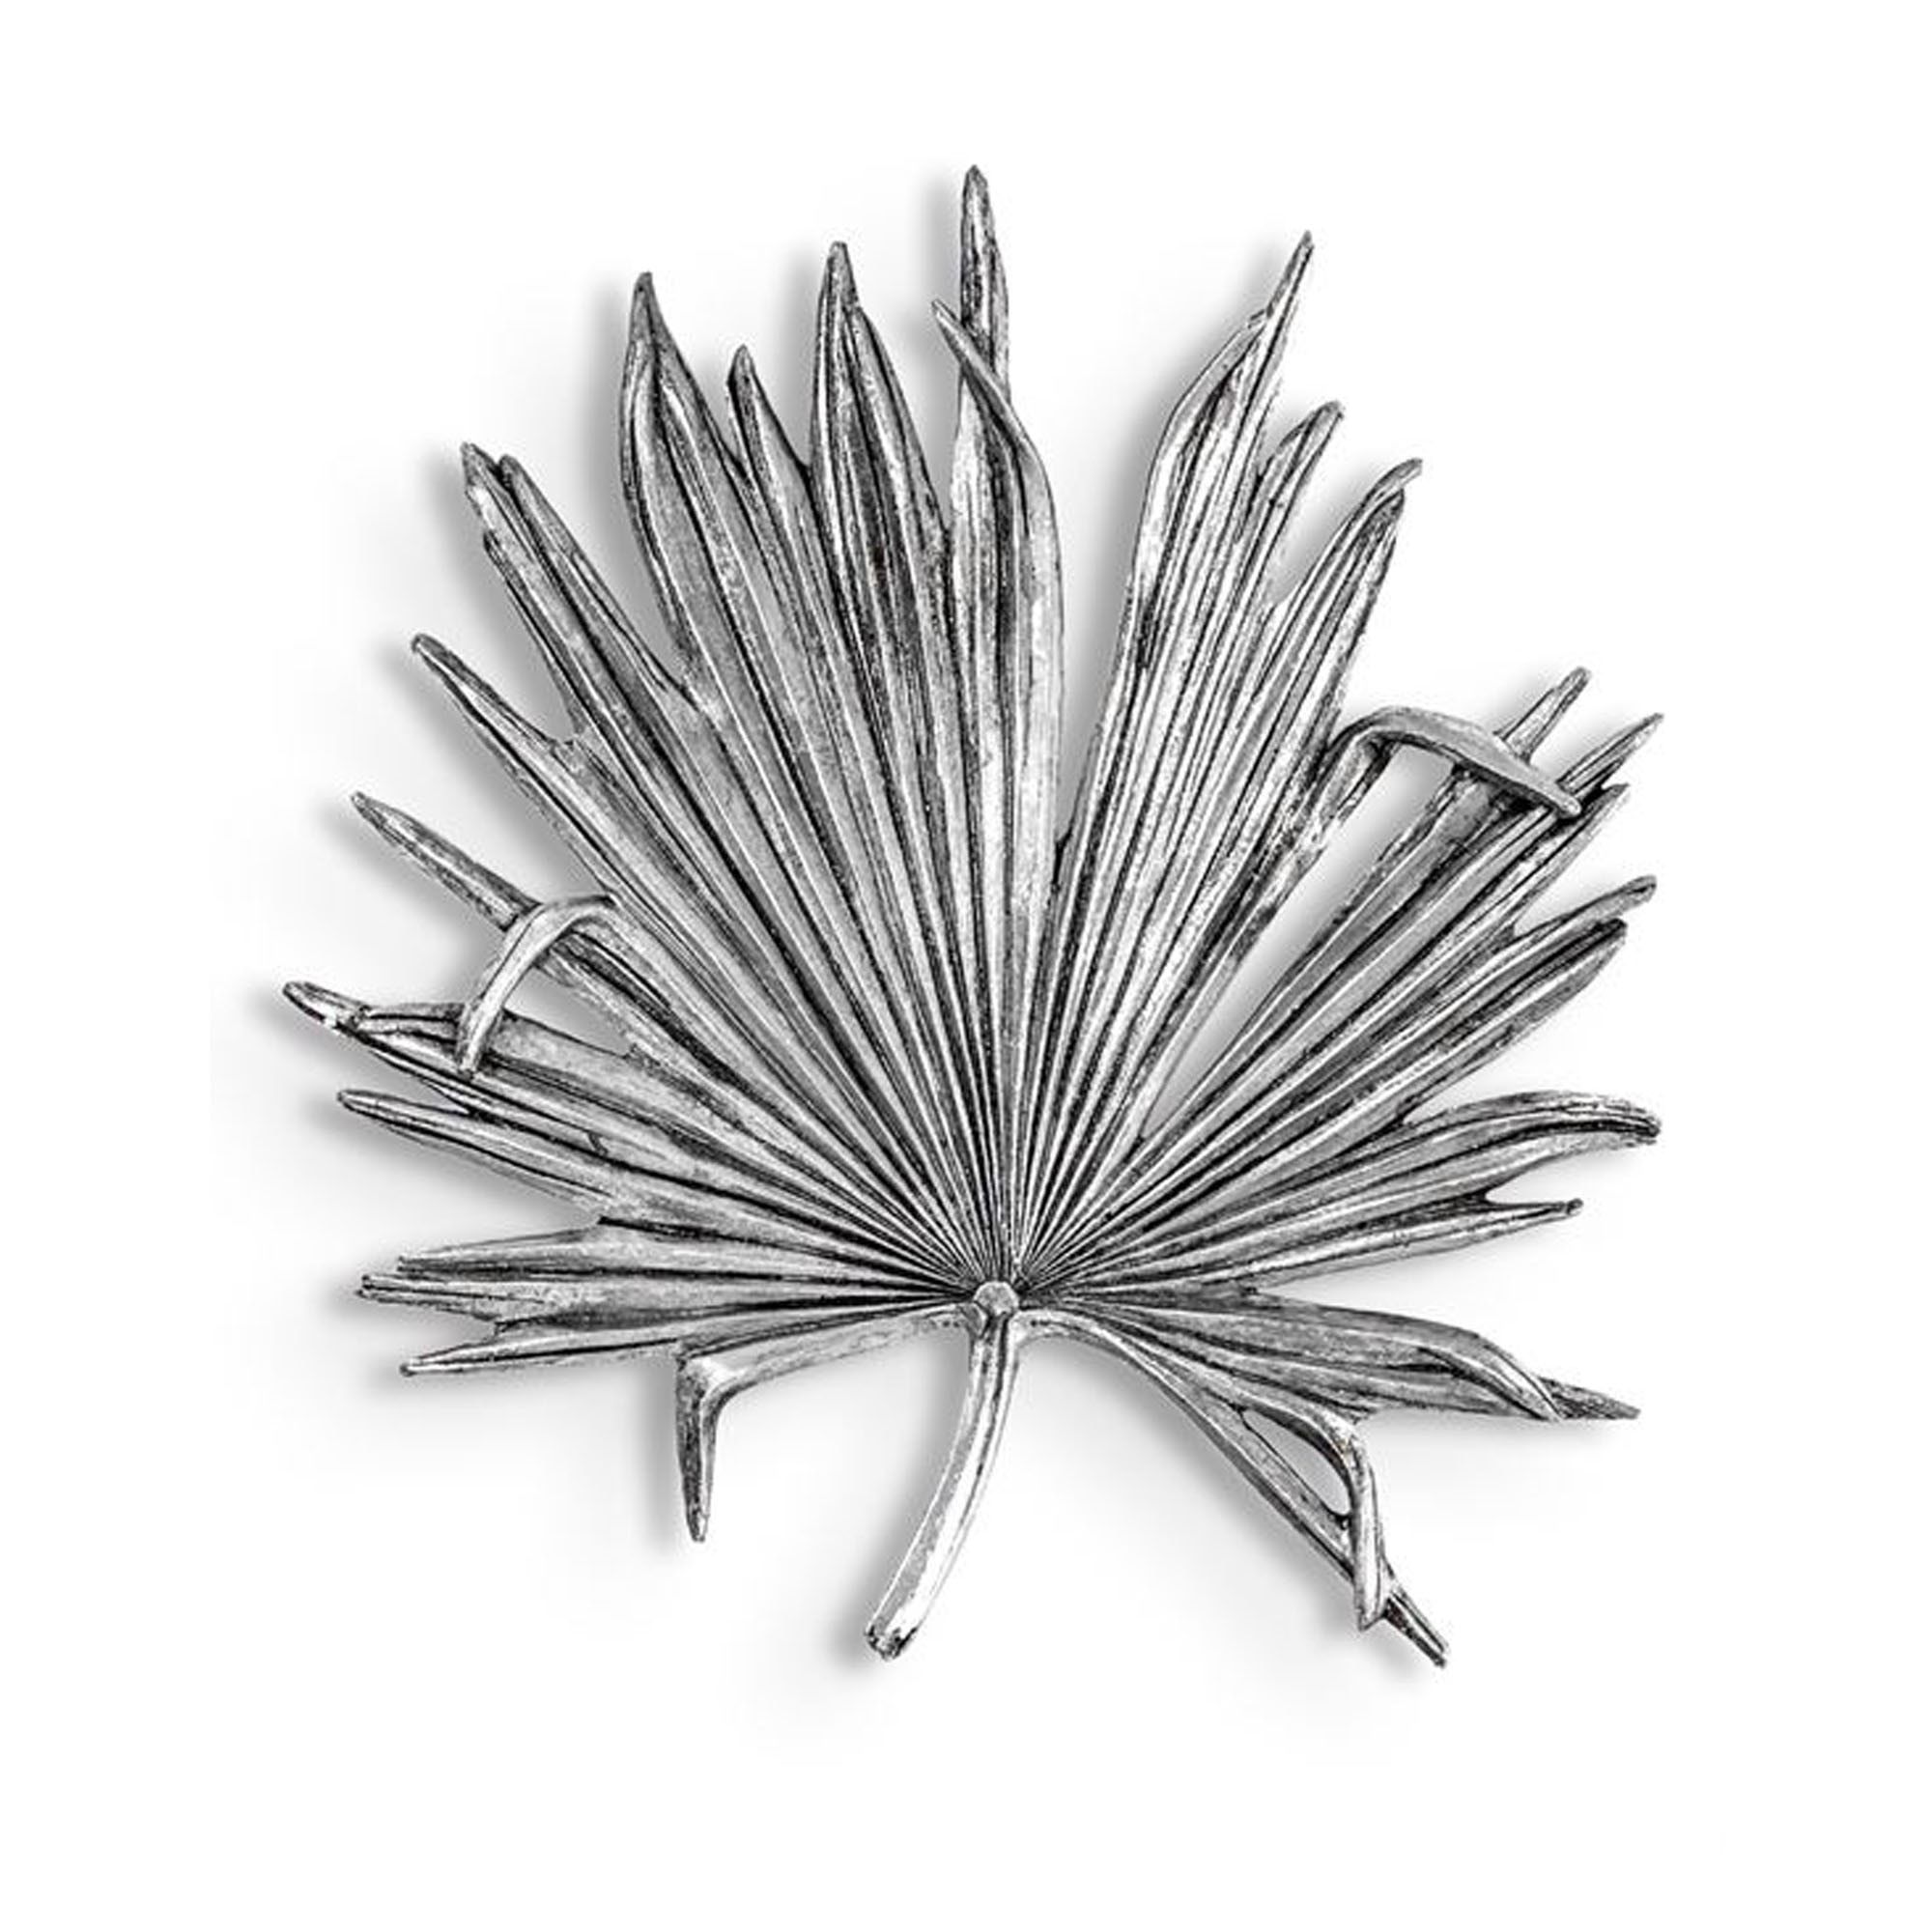 Large Antique Silver Palm Leaf Wall Decor | Antique Silver Palm Leaf In 2017 Antique Silver Metal Wall Art Sculptures (View 5 of 20)